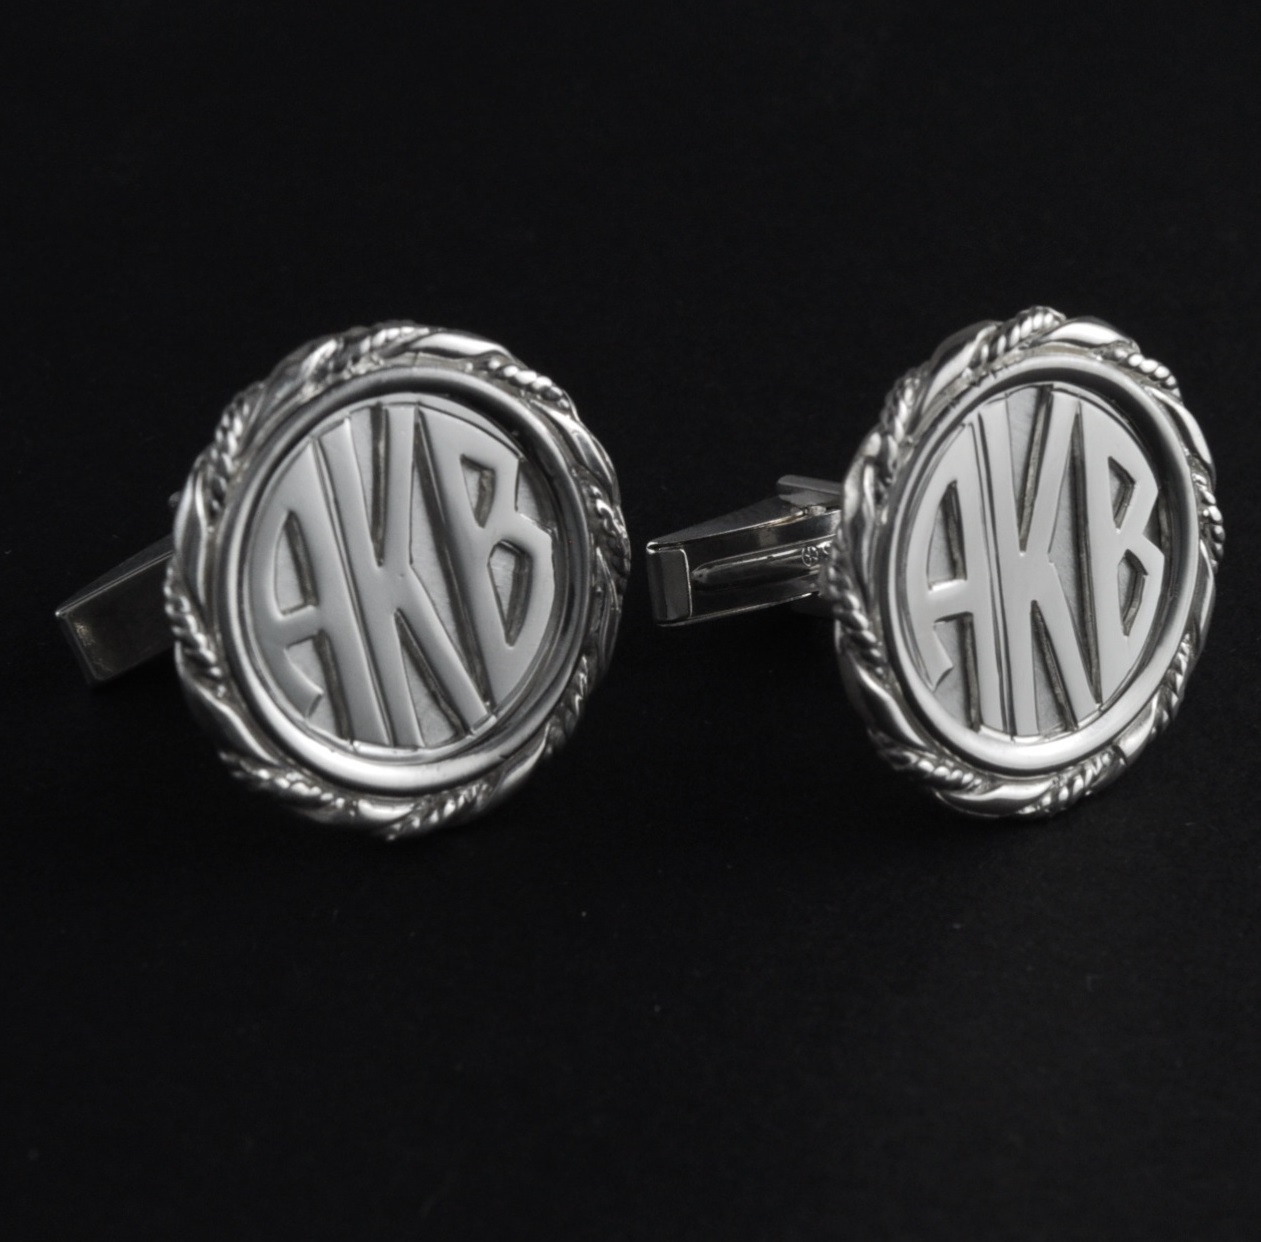 Personalized with 3 Initials Monogram Cufflinks Sterling Silver [MISC015] - $90.95 : Aninxa ...